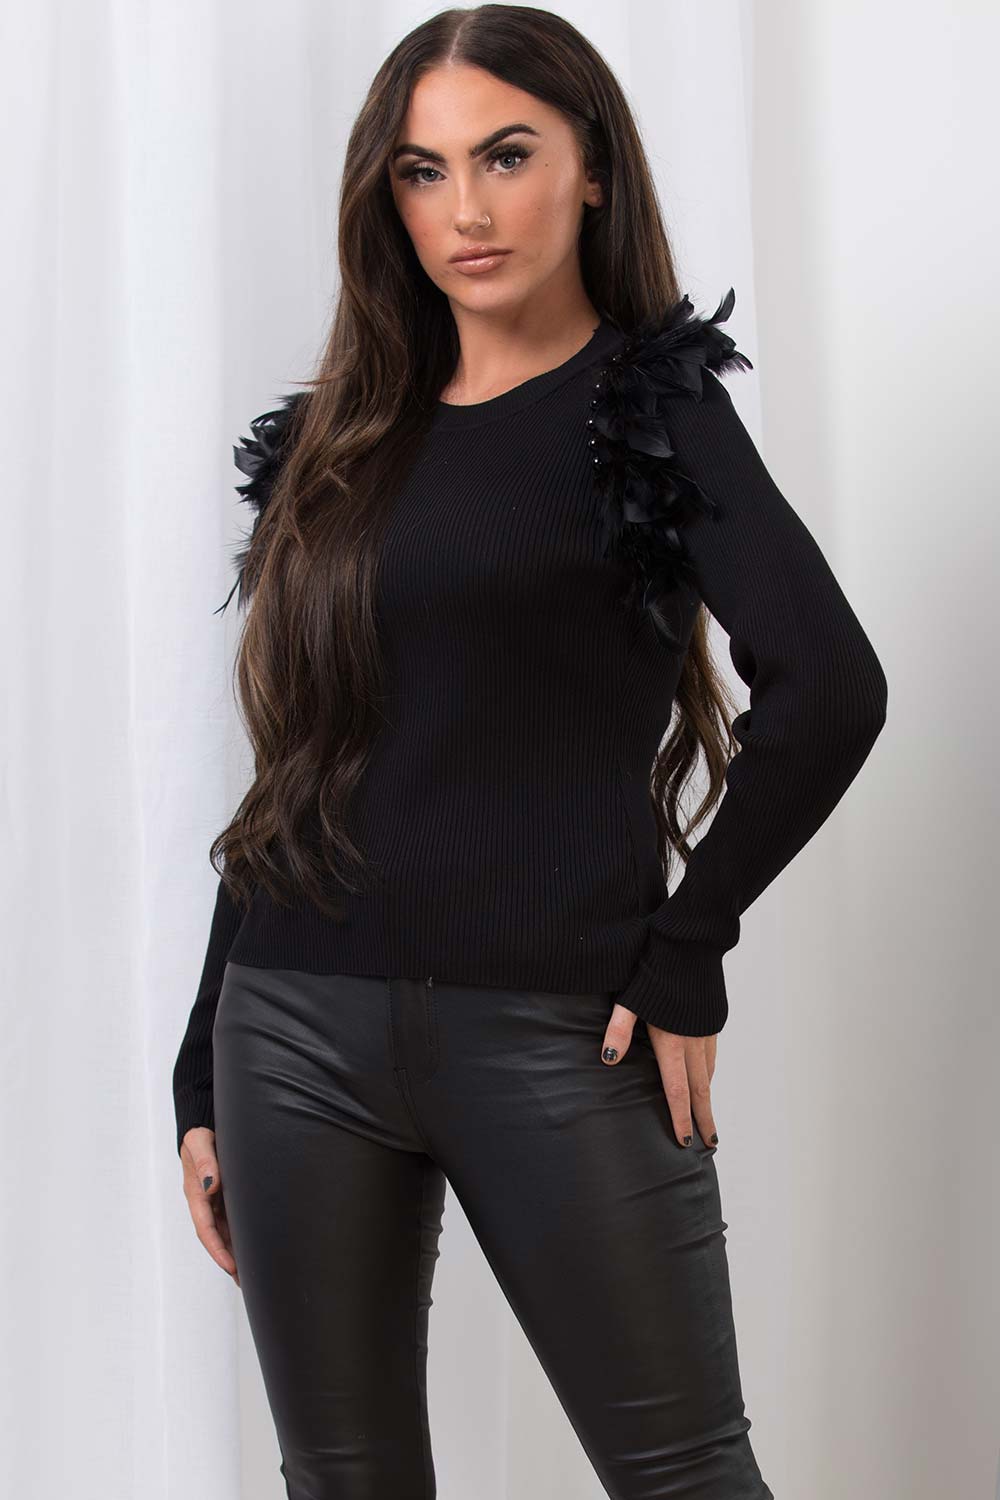 womens black jumper with feathers and pearls